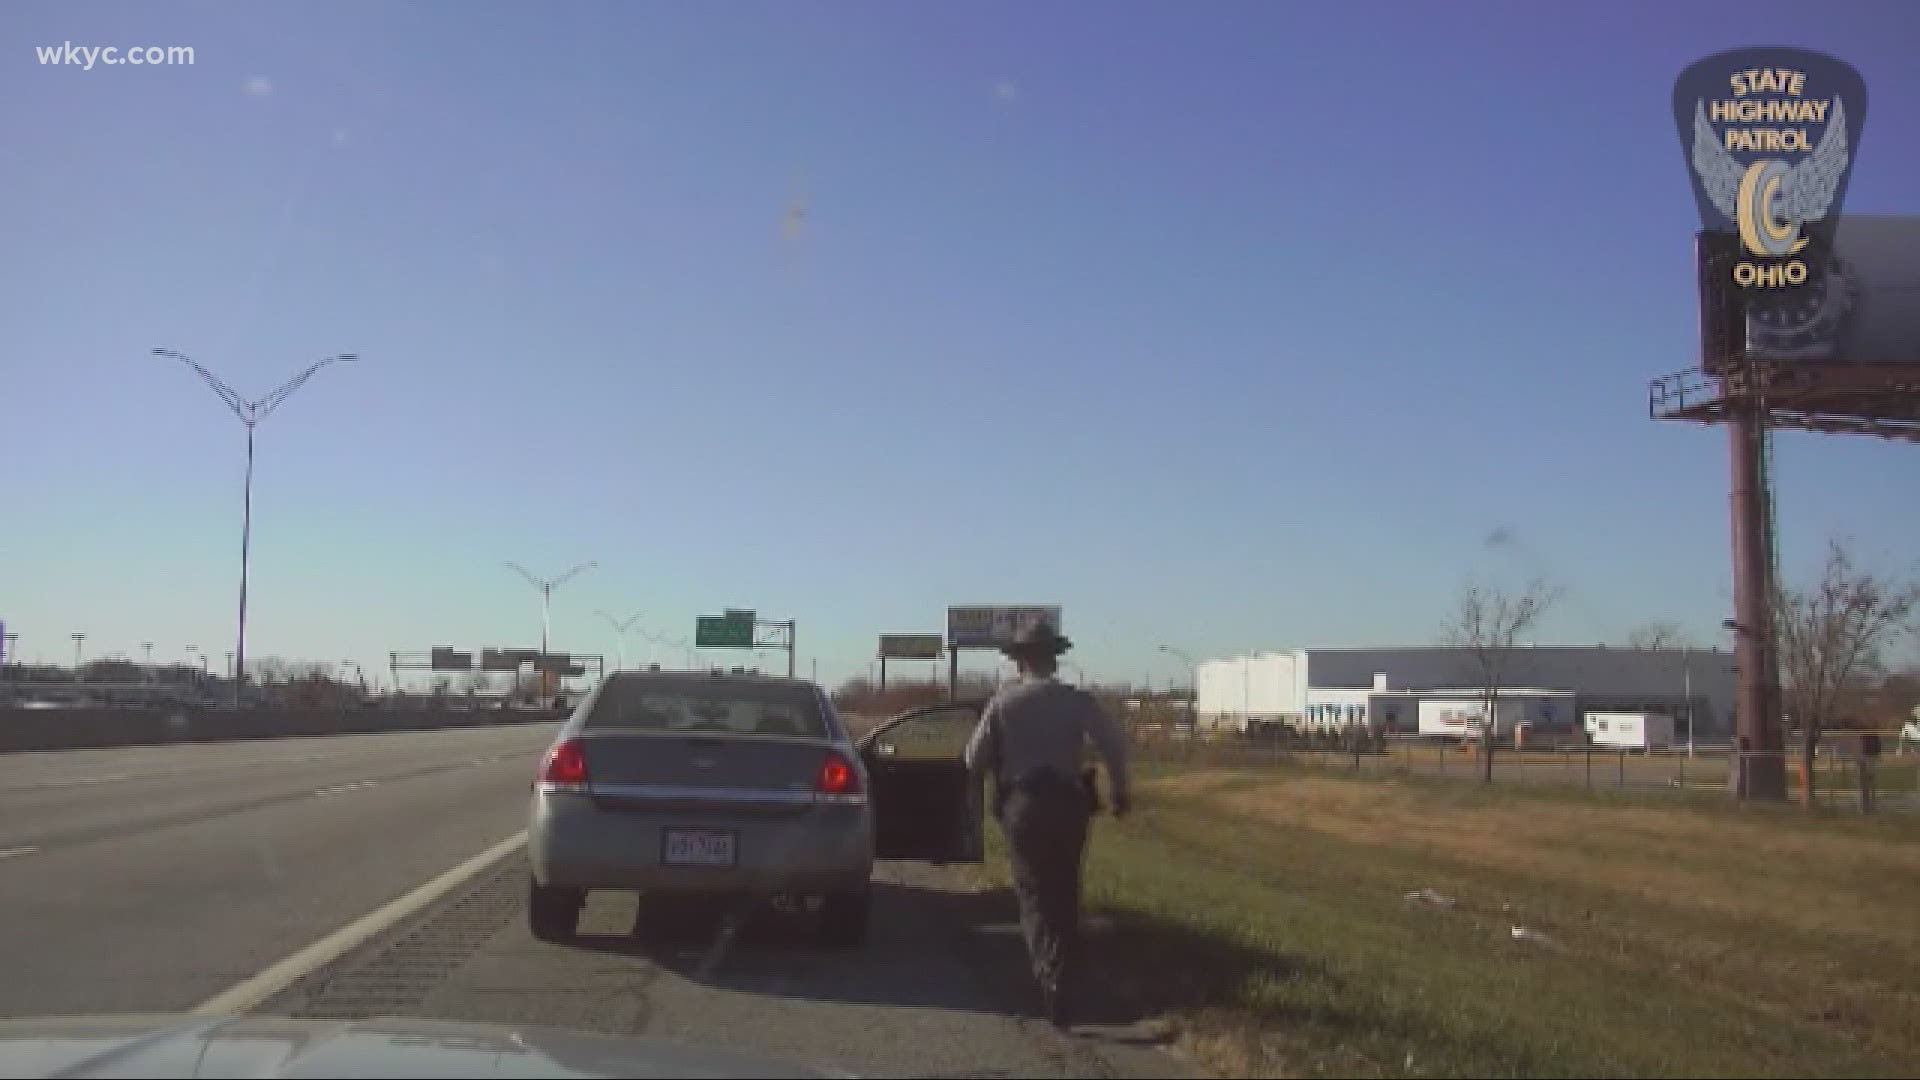 Police dashcam shows a local state trooper saving a woman's life on the highway. Will Ujek talk to this modest hero and how it all unfolded.